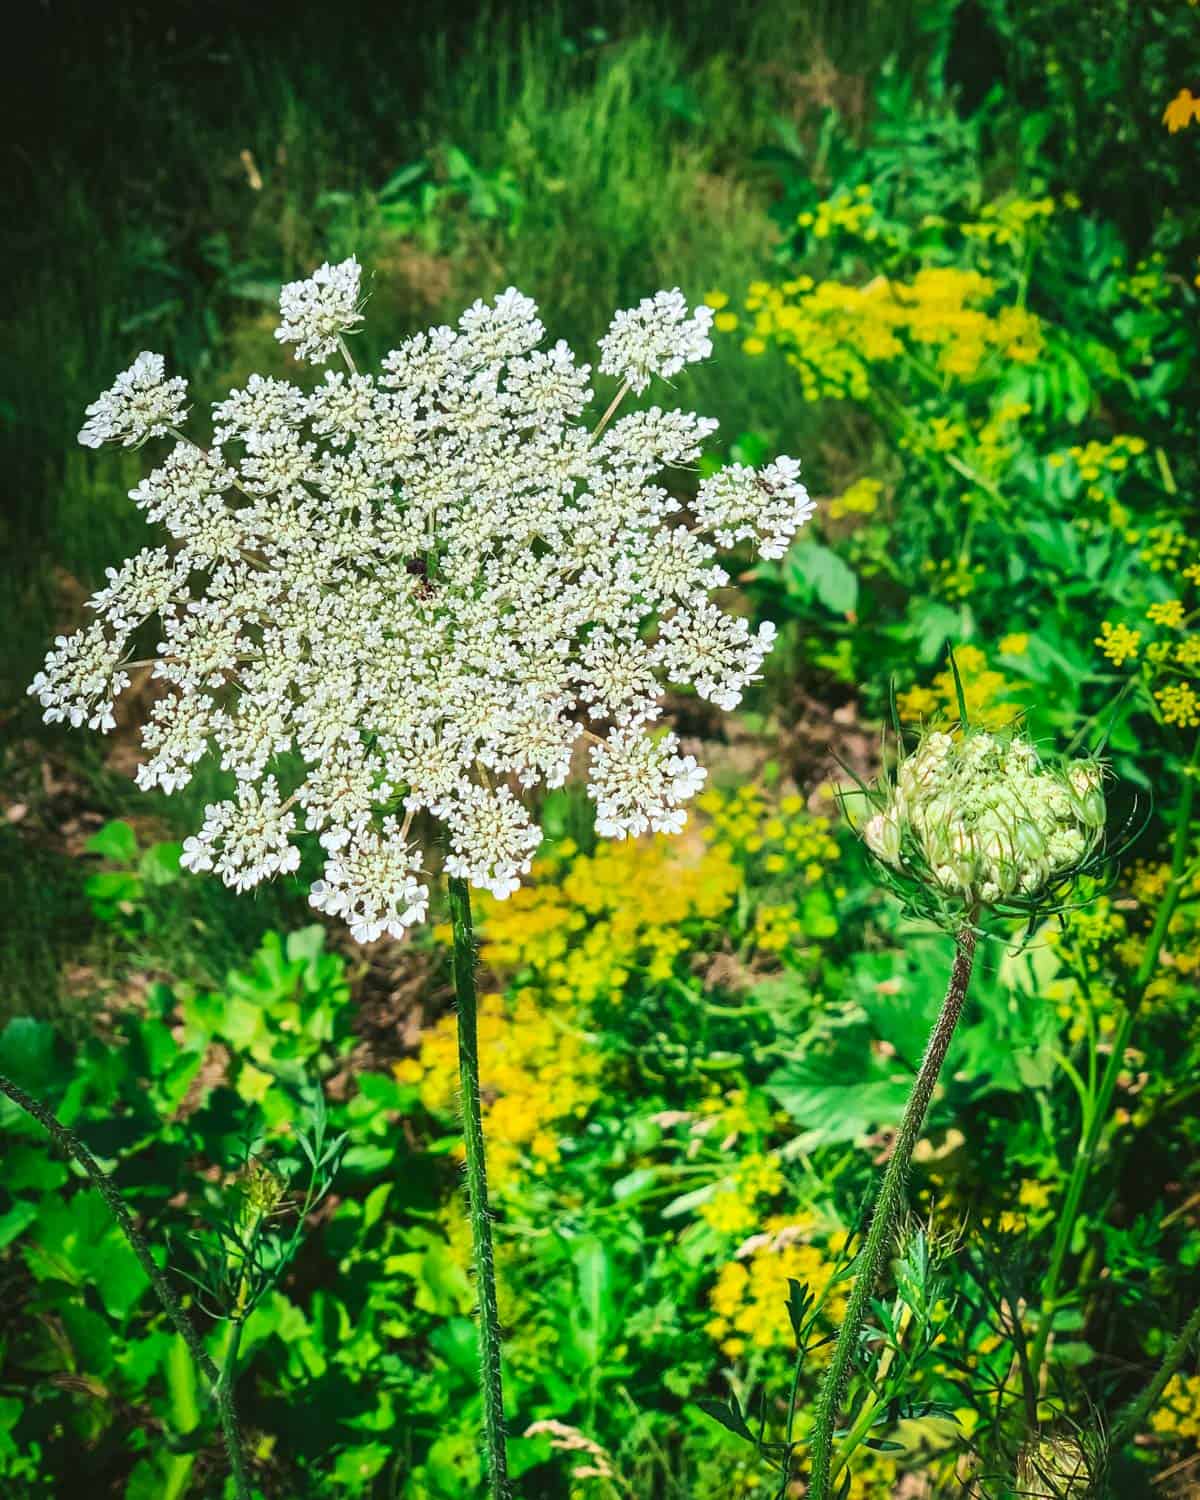 Foraging Queen Anne's Lace: Identification, Look-alikes, and Uses